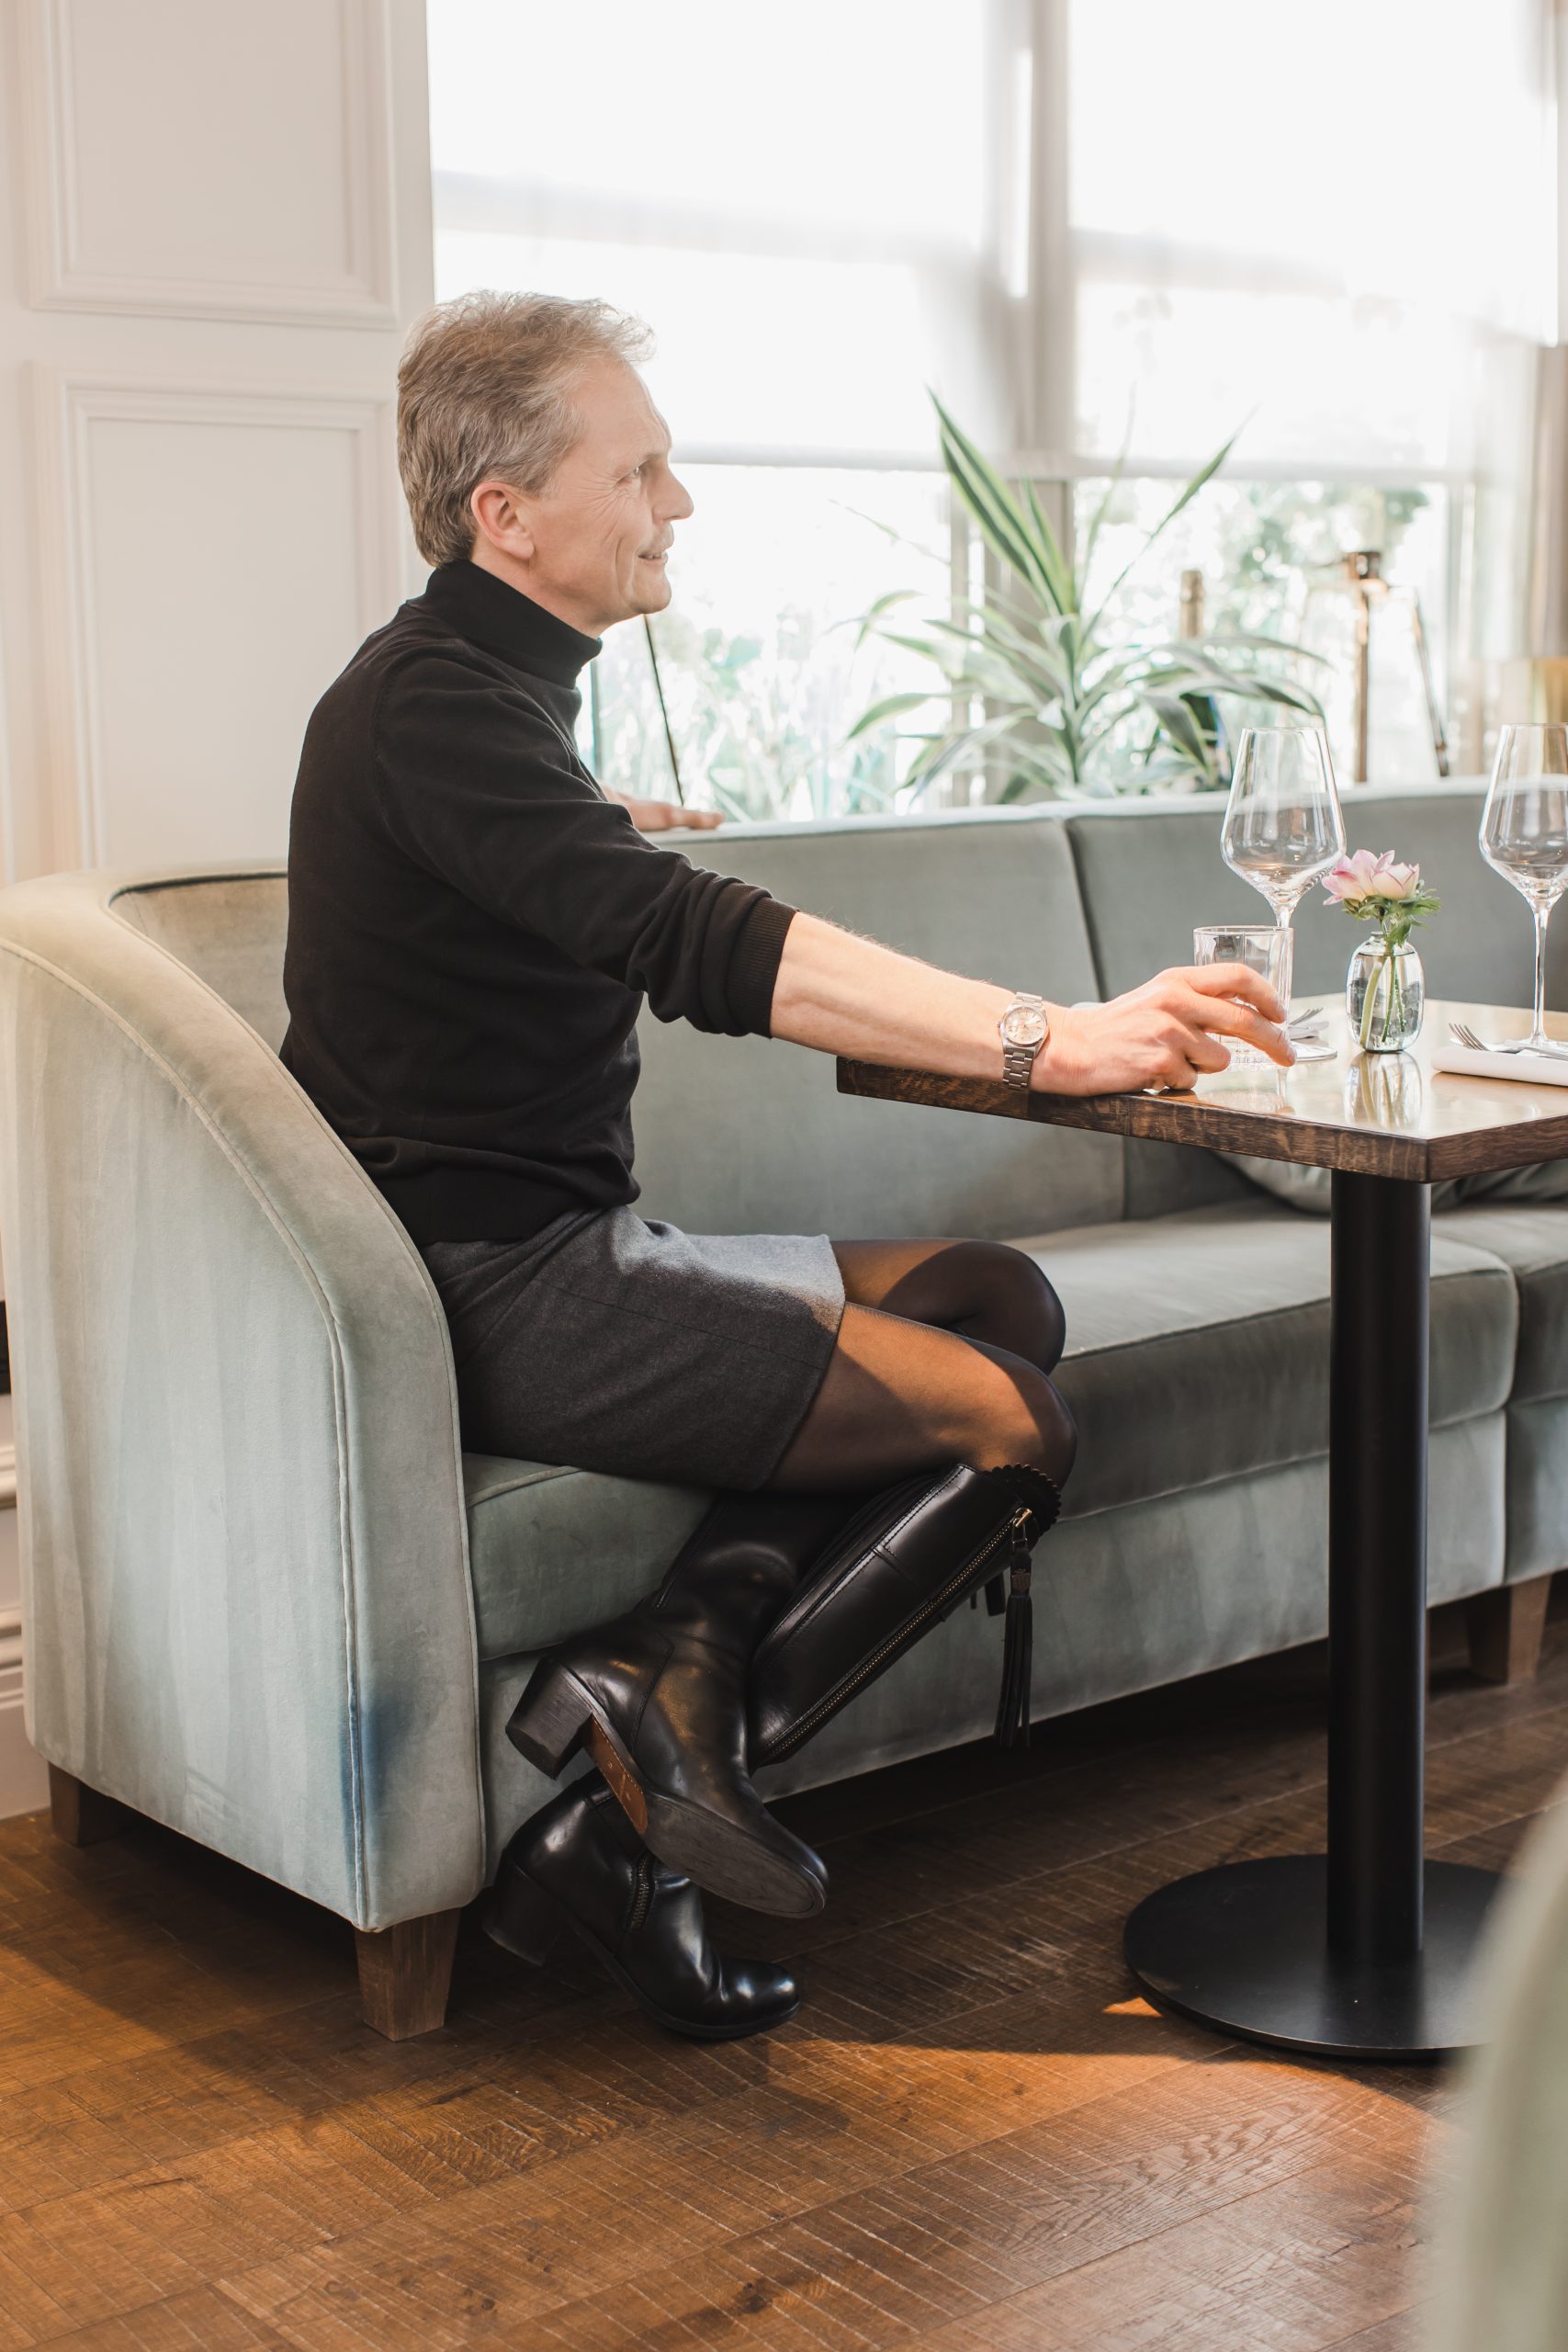 Grey haired man sitting at a restaurant table wearing a tailored men's skirt, black turtleneck sweater and black boots.